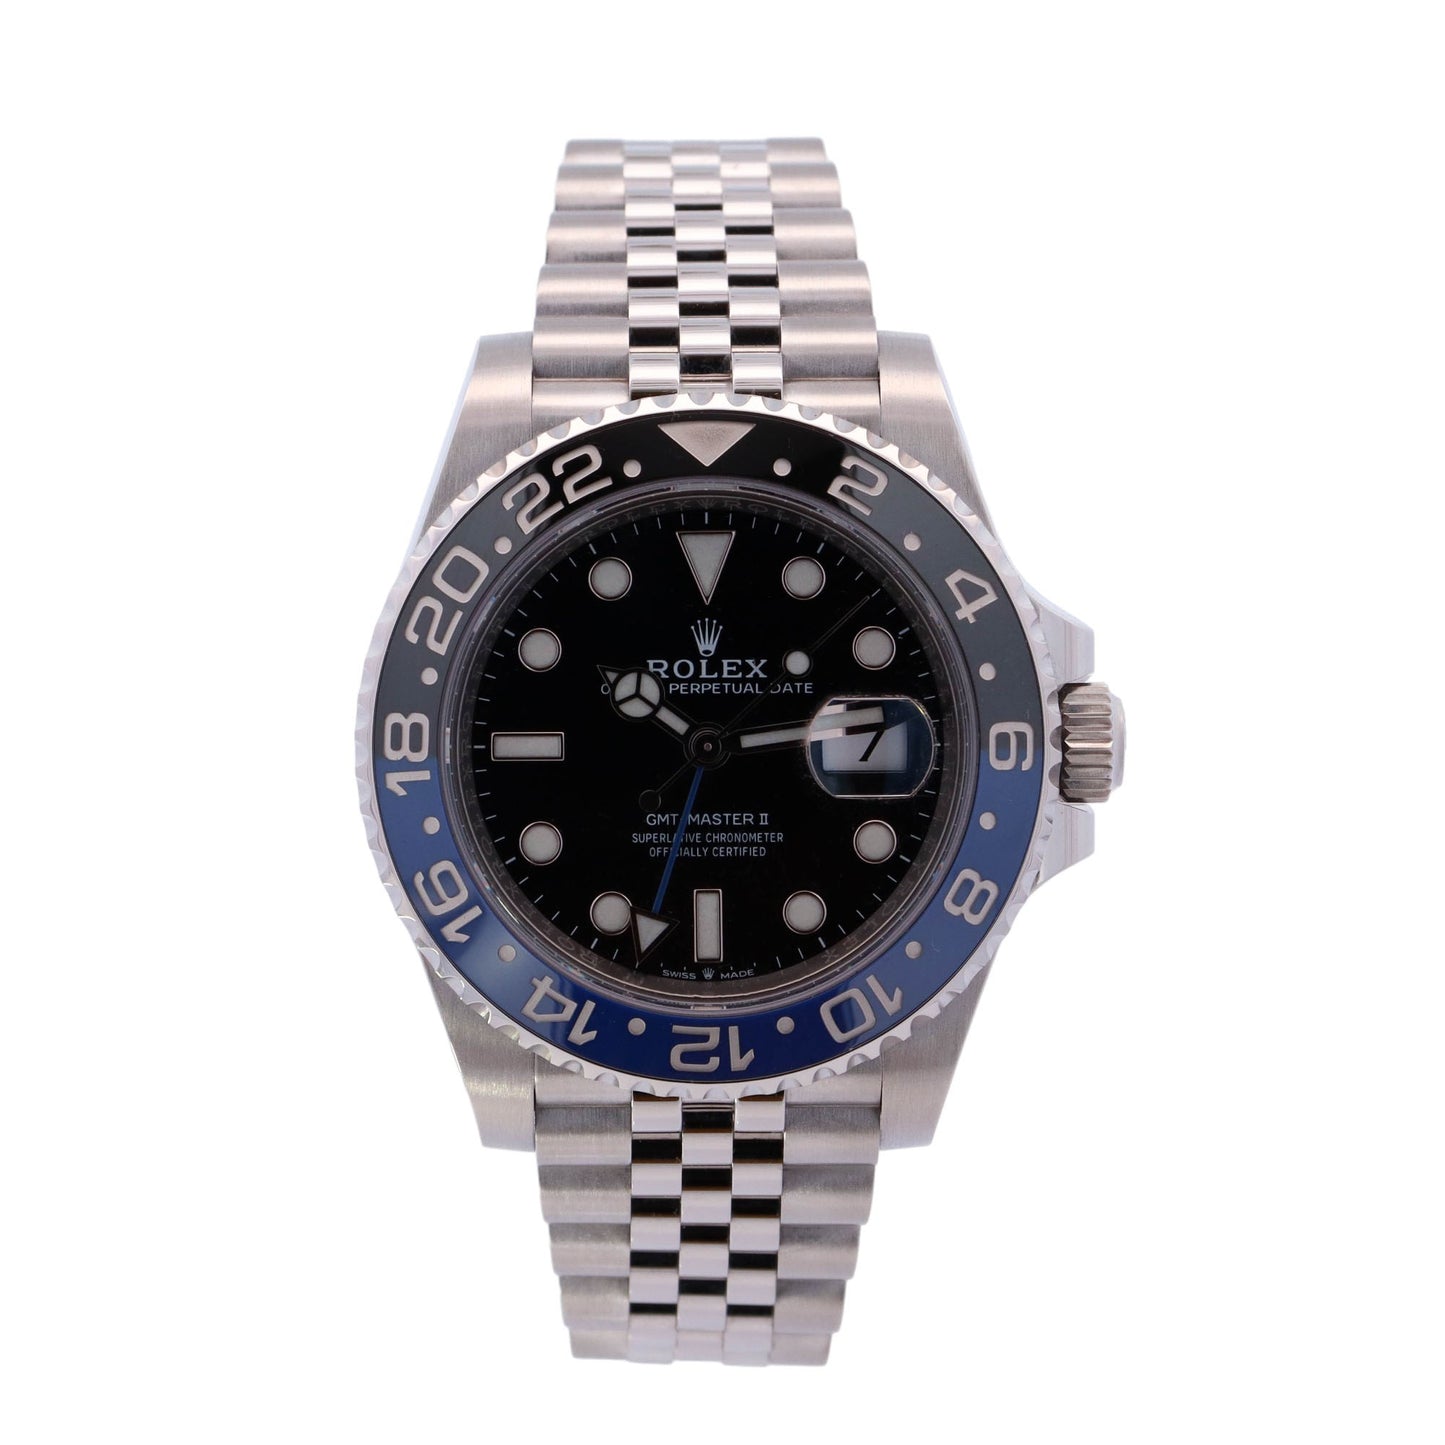 Rolex GMT Master II "Batgirl" Stainless Steel 40mm Black Dot Dial Watch Reference #: 126710BLNR